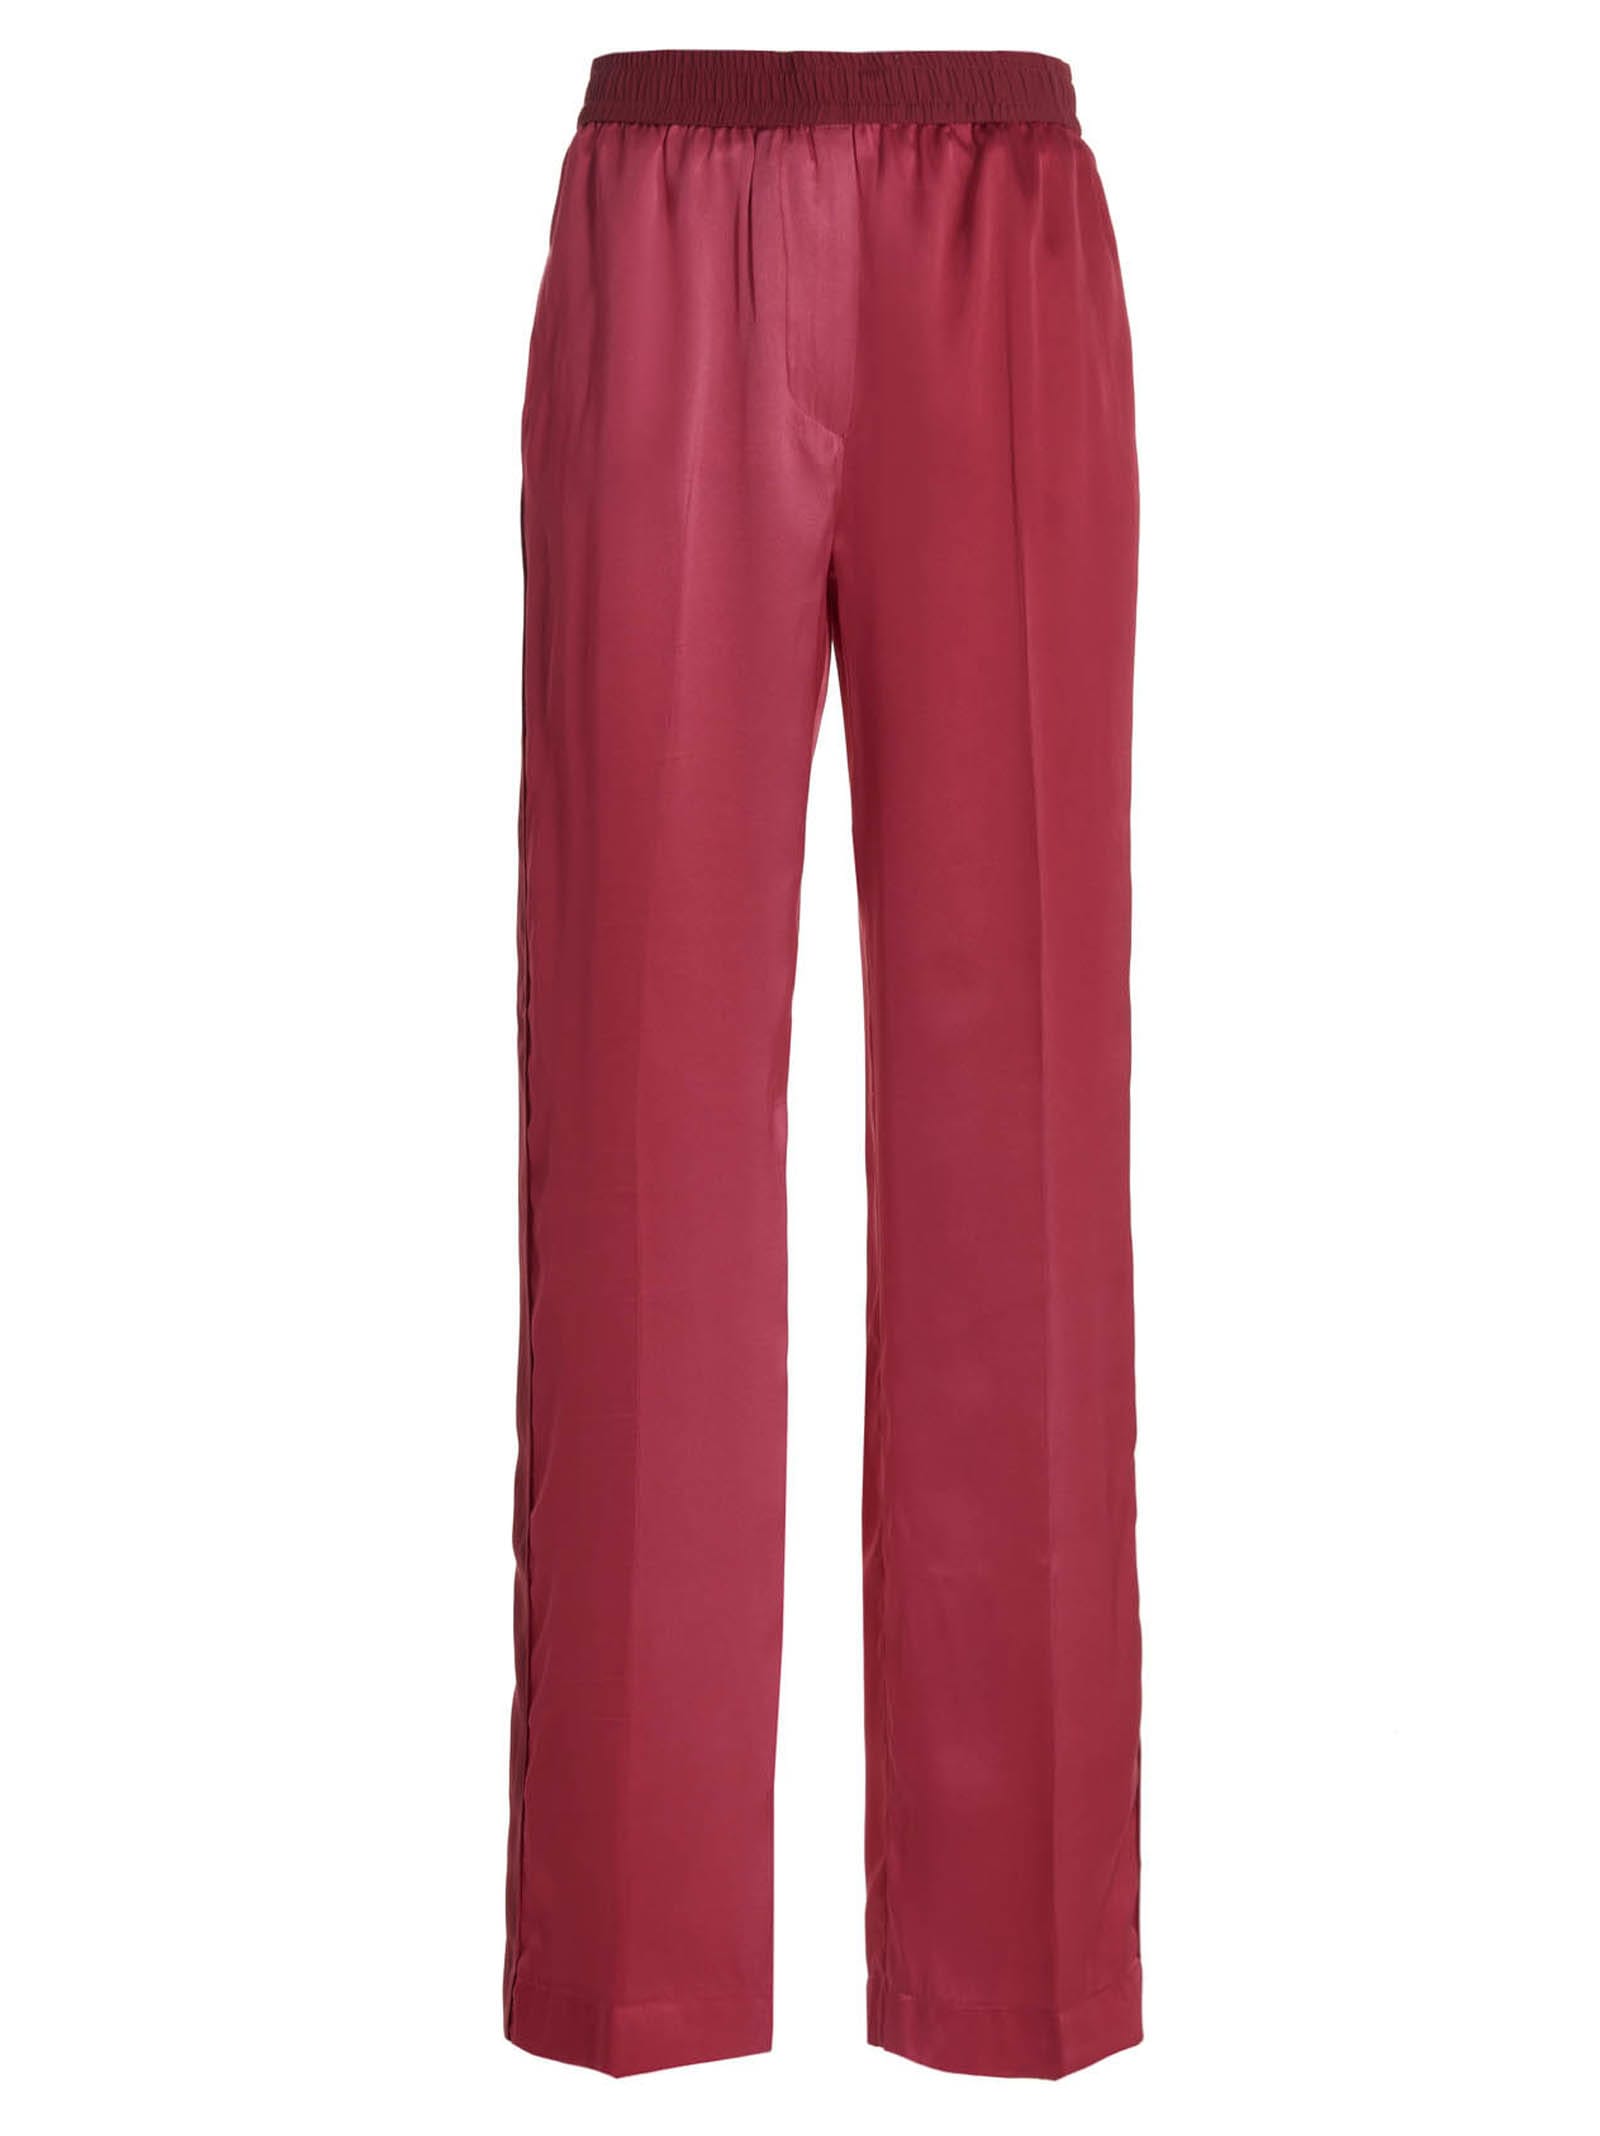 For Restless Sleepers doride Trousers